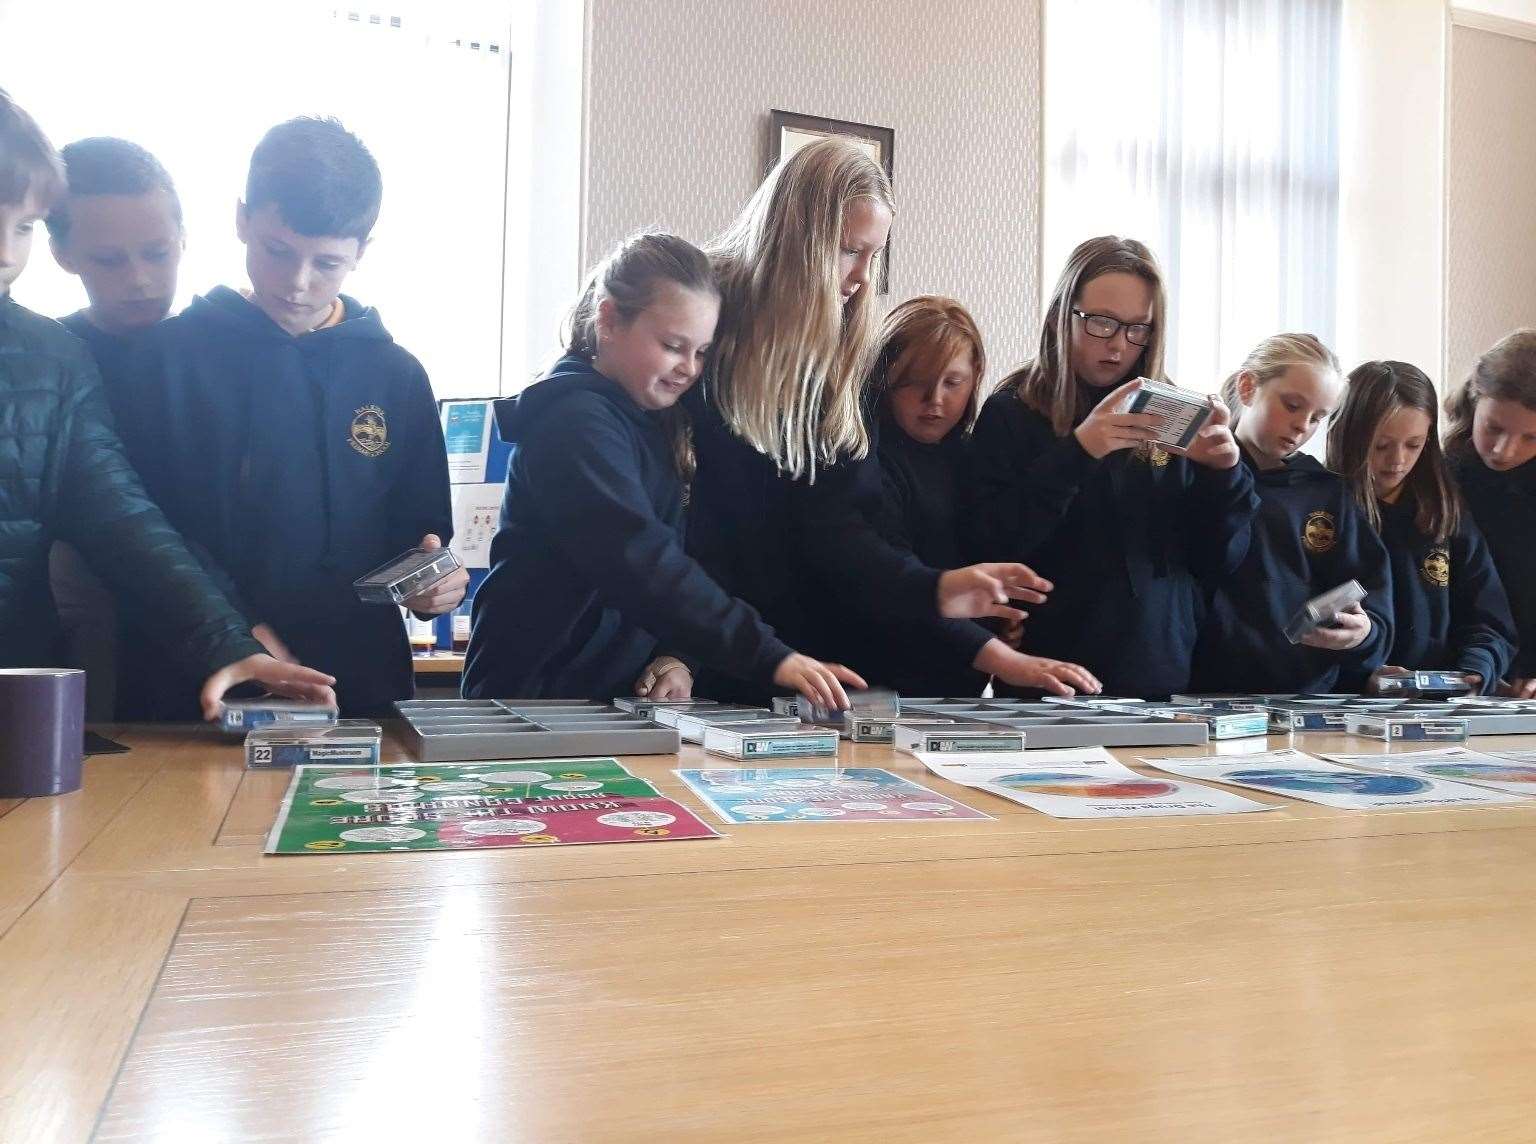 Pupils learned of the dangers of drugs from Caithness Drug and Alcohol Forum chairperson Siobhan Gunn, as well as trying 'mocktails' – a healthy and fruity alternative to alcohol.